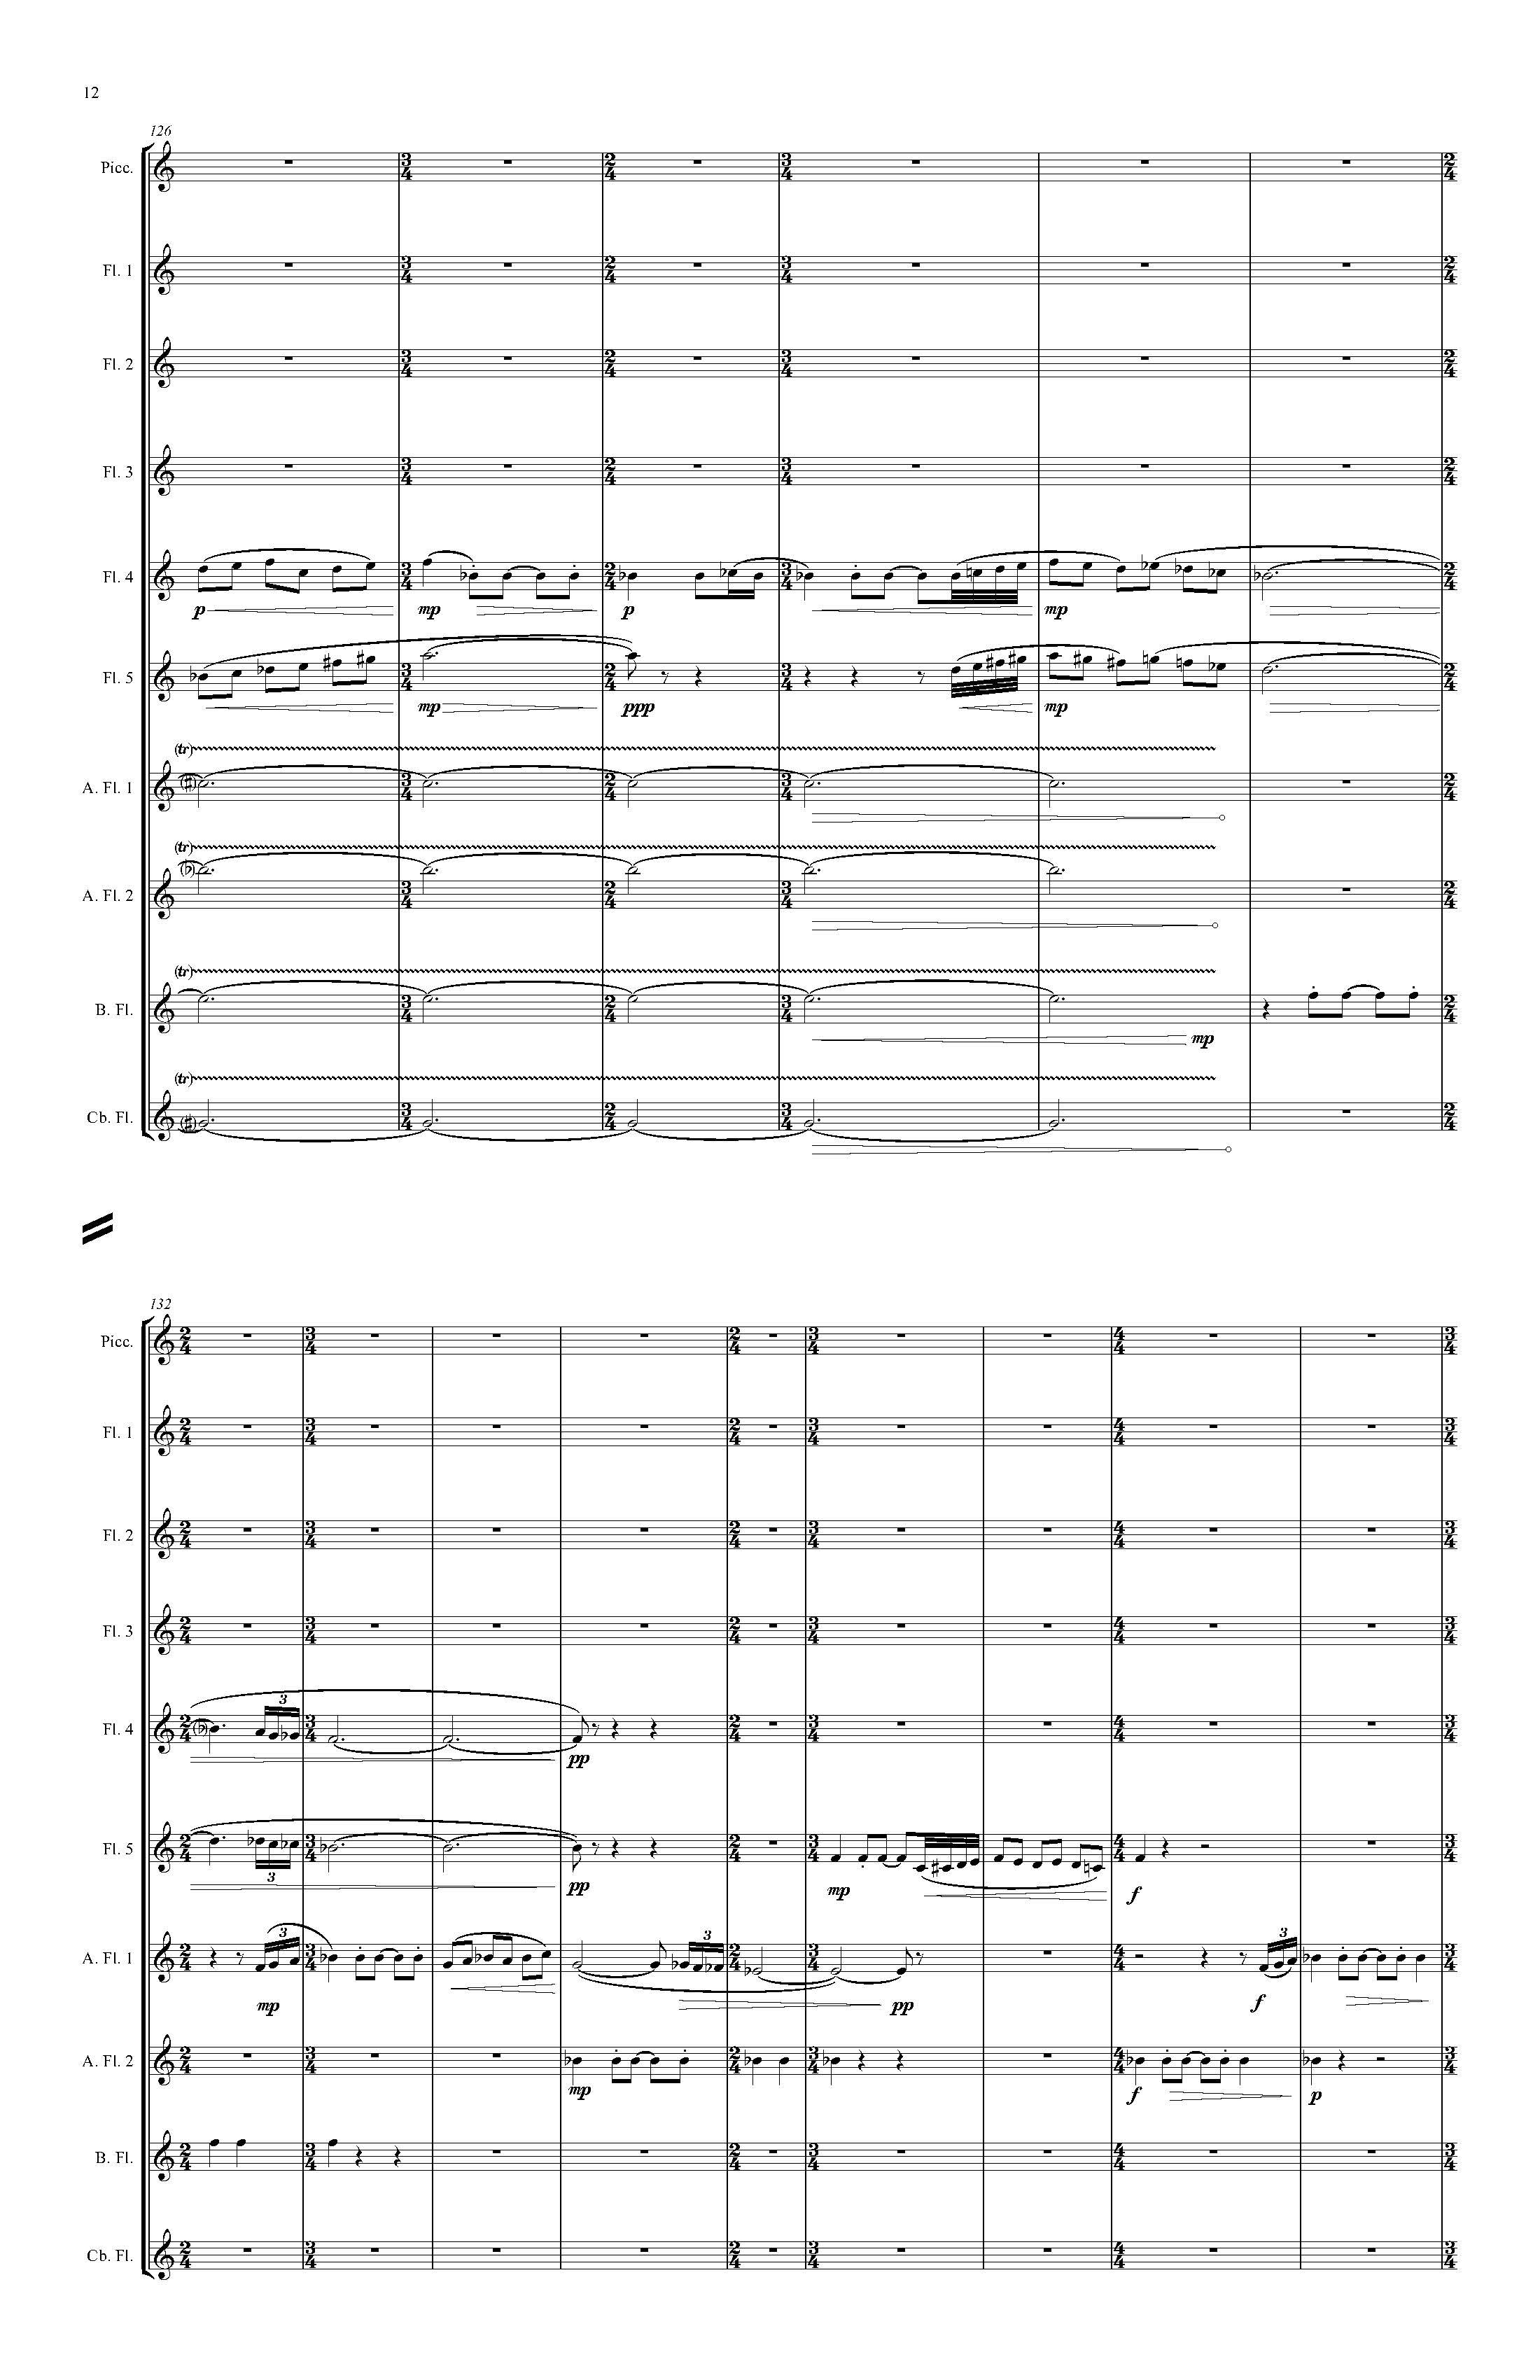 PIPES - Complete Score_Page_18.jpg